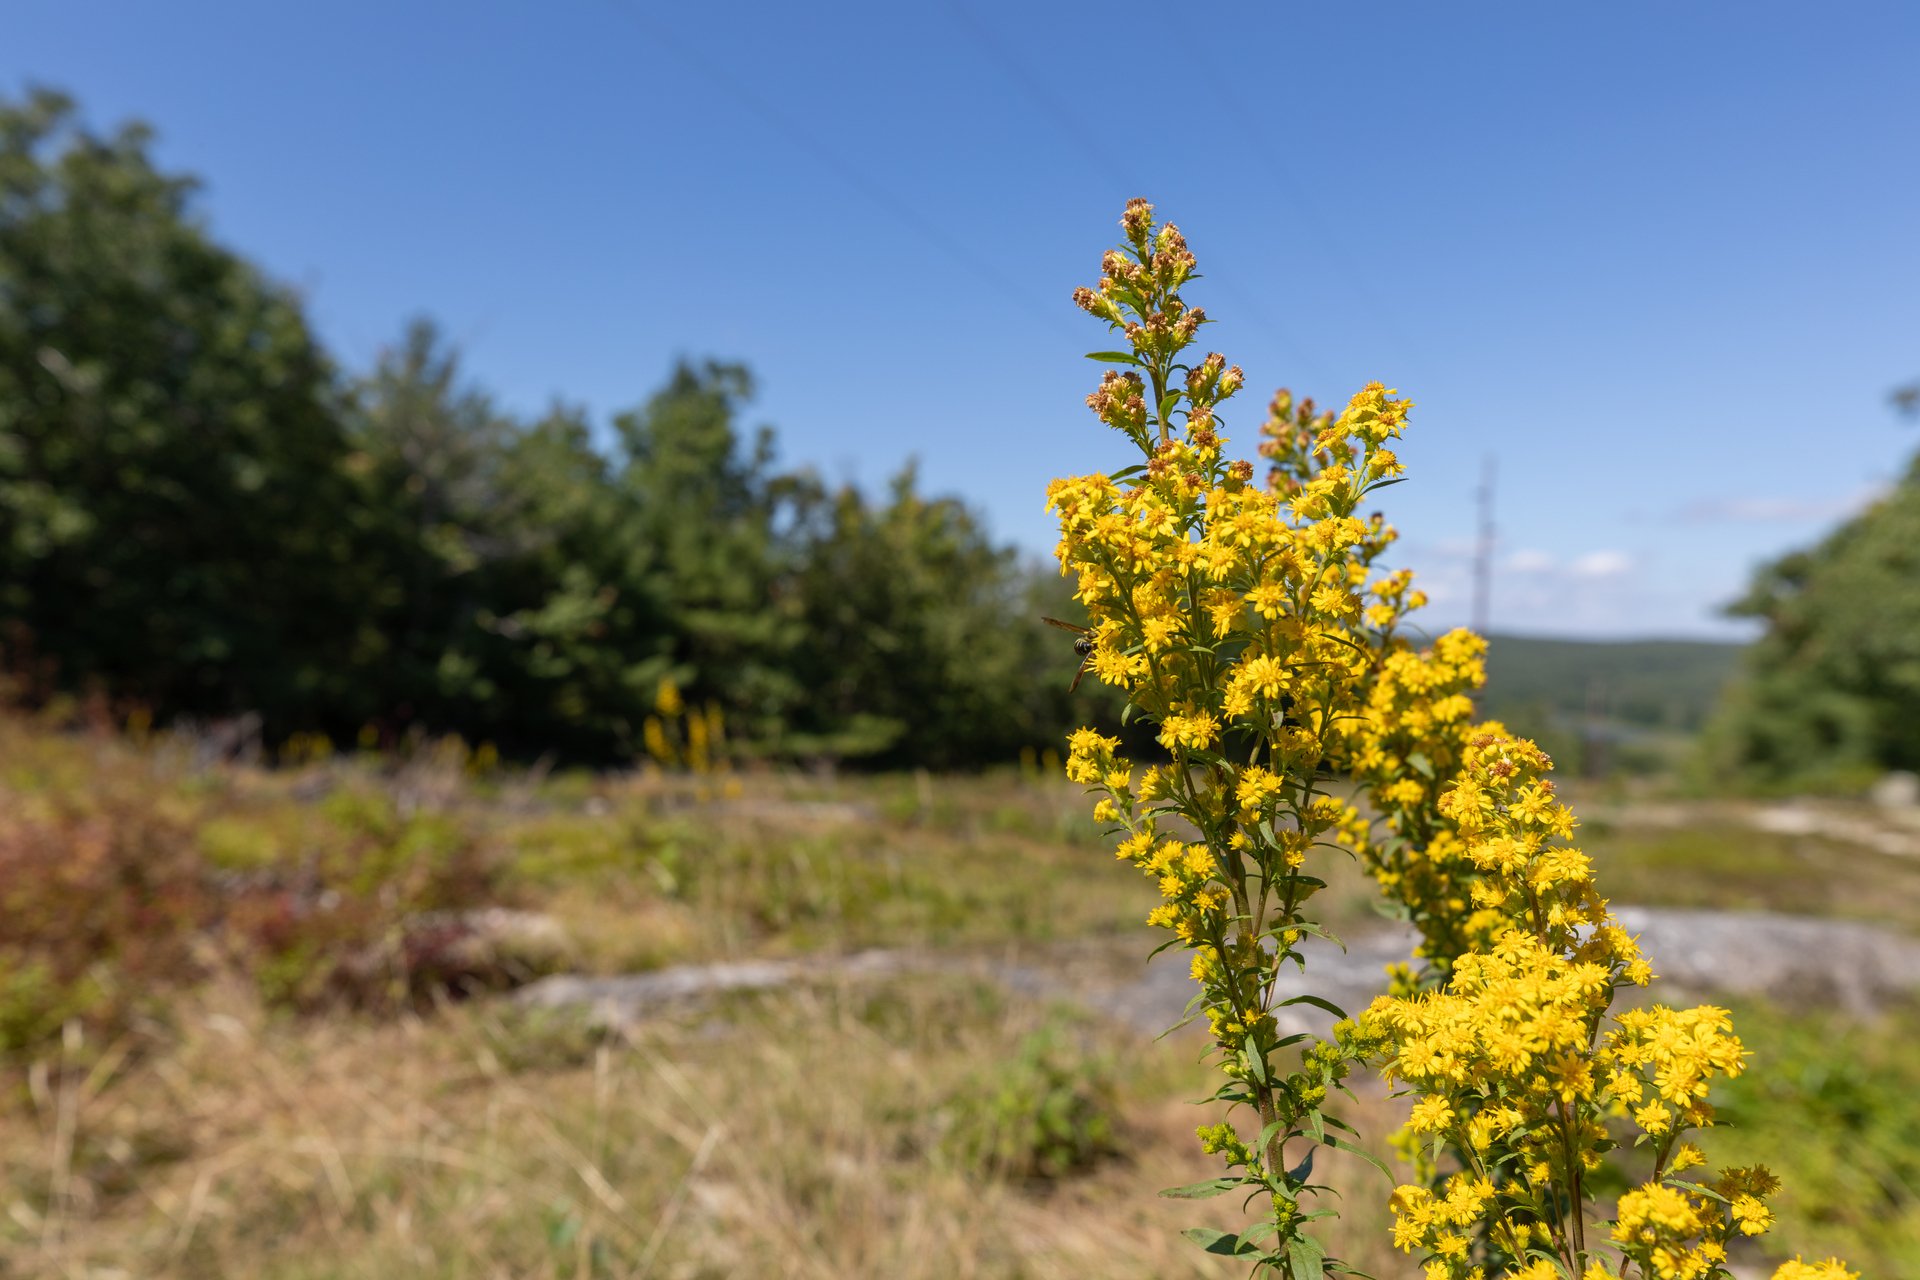 Yellow flower in focus, background is a clearing in a pine forest with tall grass and rocks.